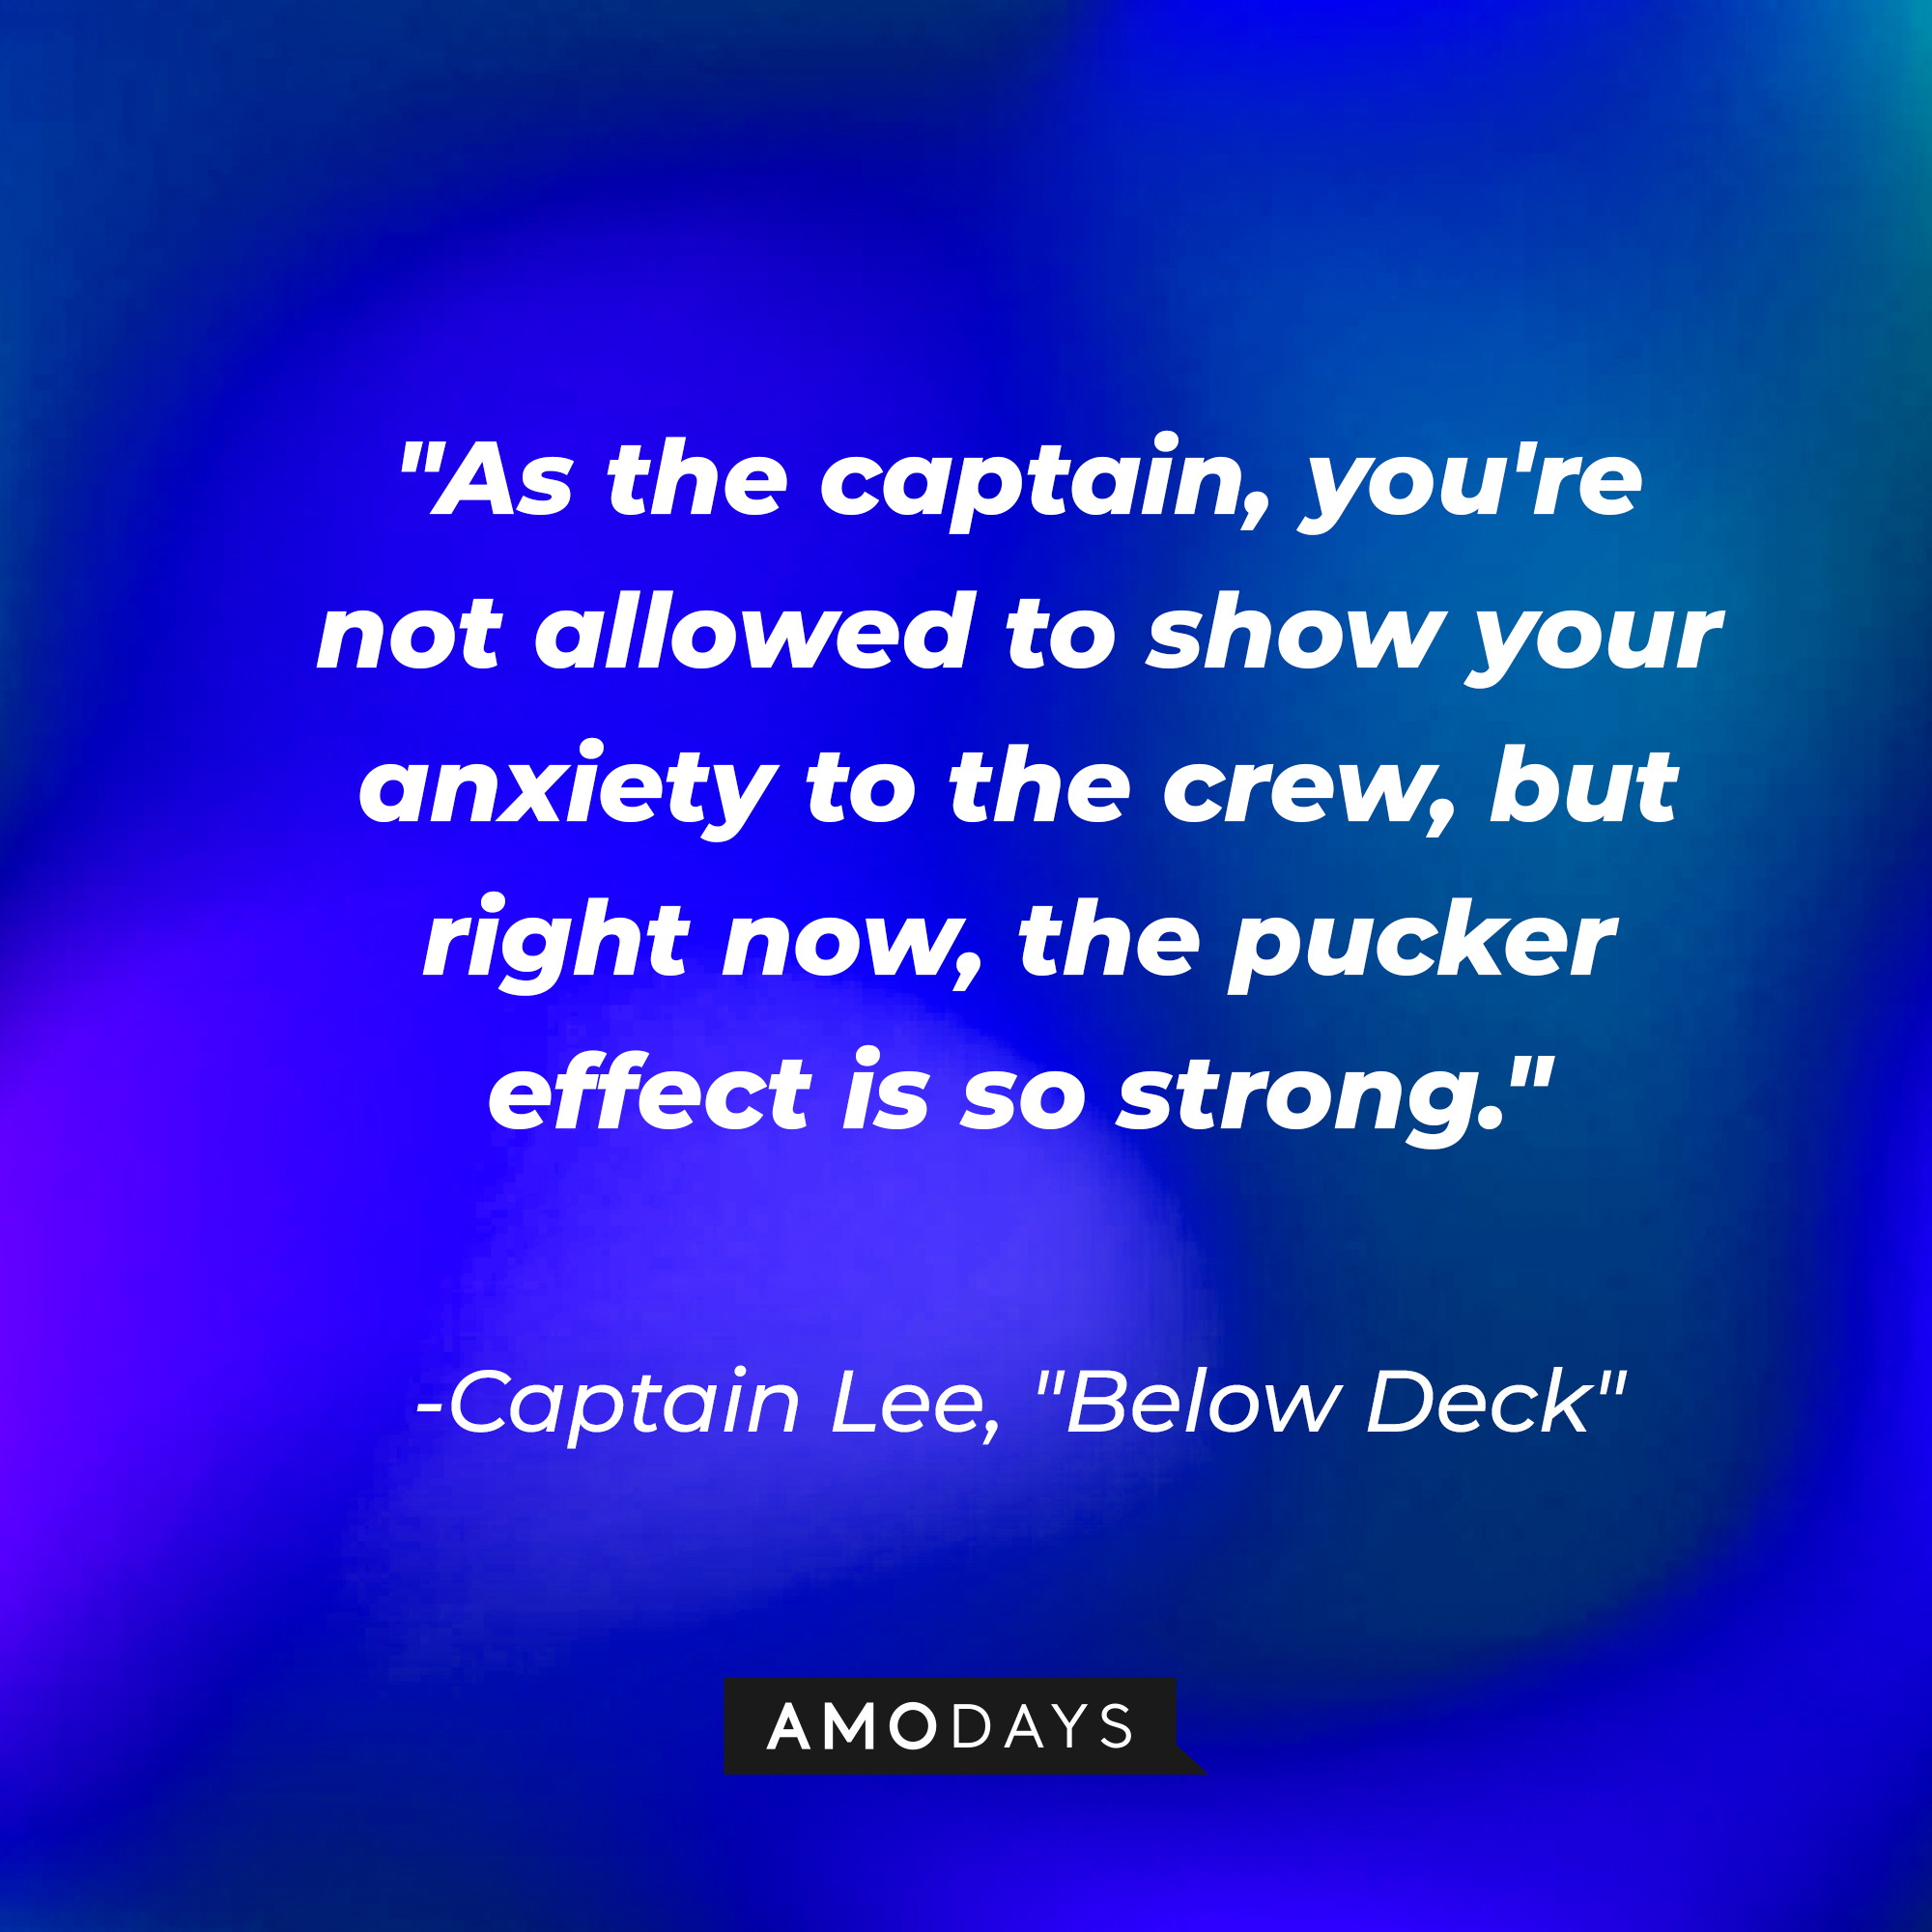 Captain Lee's quote from "Below Deck:" "As the captain, you're not allowed to show your anxiety to the crew, but right now, the pucker effect is so strong." | Source: AmoDays